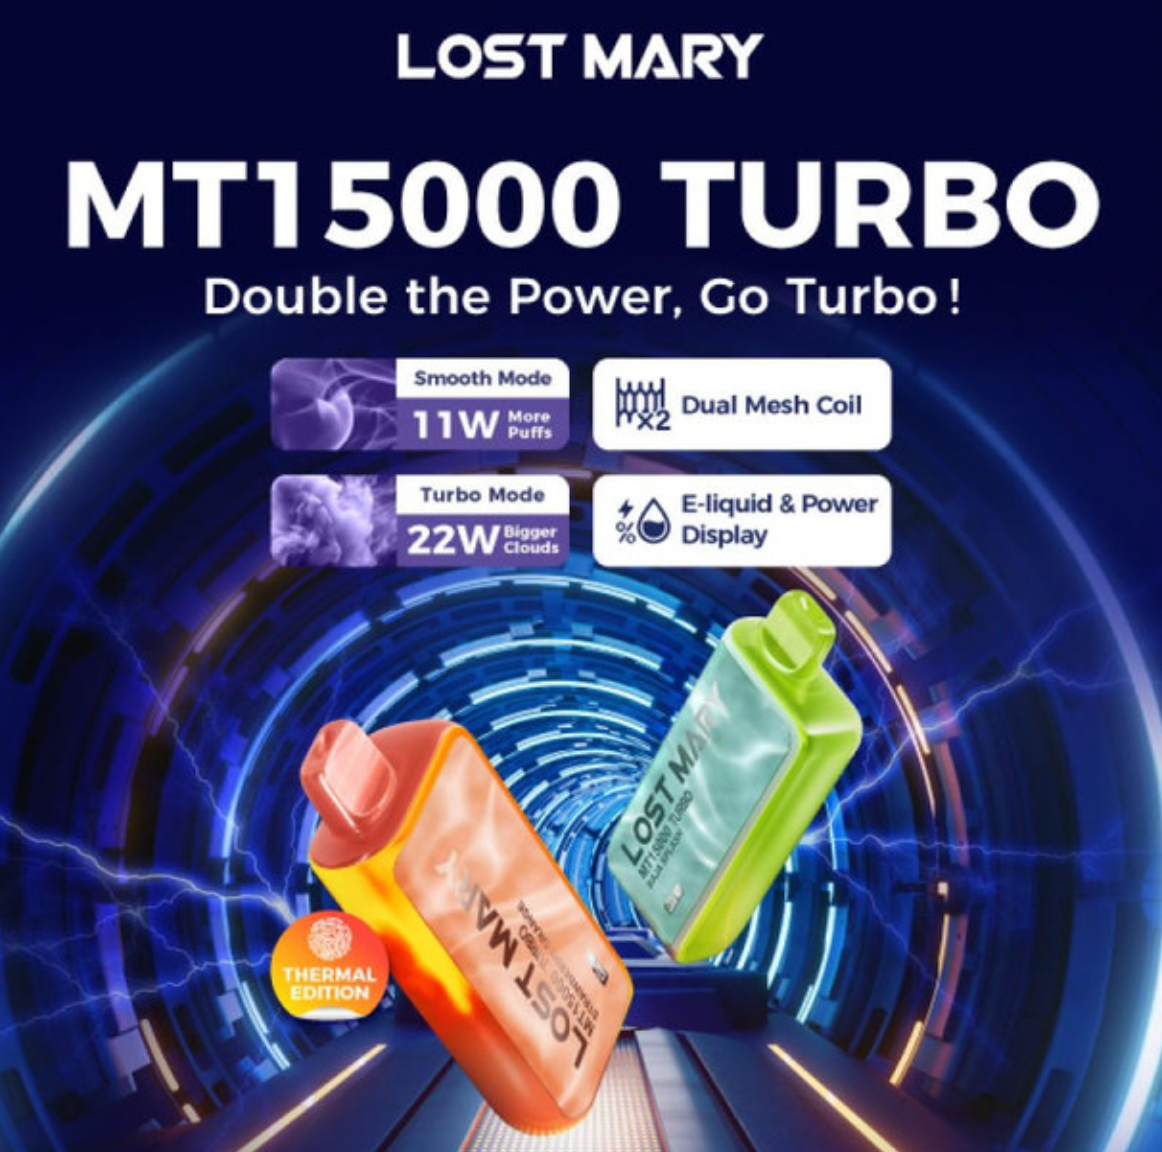 LOST MARY THERMAL 15,000 PUFF (NEW)